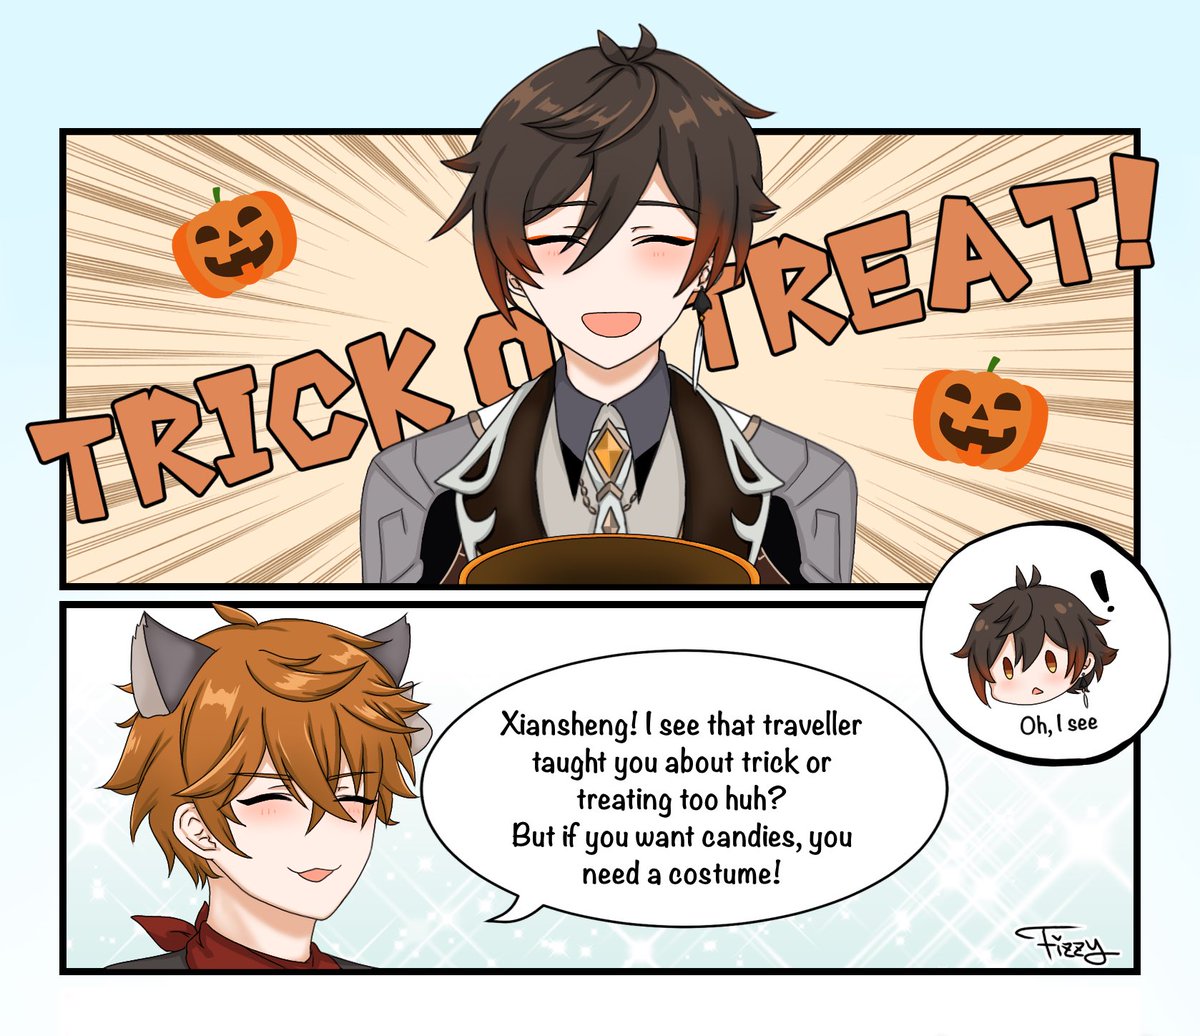 Trick or treat! 👻
(I'm extremely late for Halloween lol)

#genshinimpact #原神 #zhongli #Childe #tartaglia #Tartali #タル鍾 #Halloween #halloween2021 